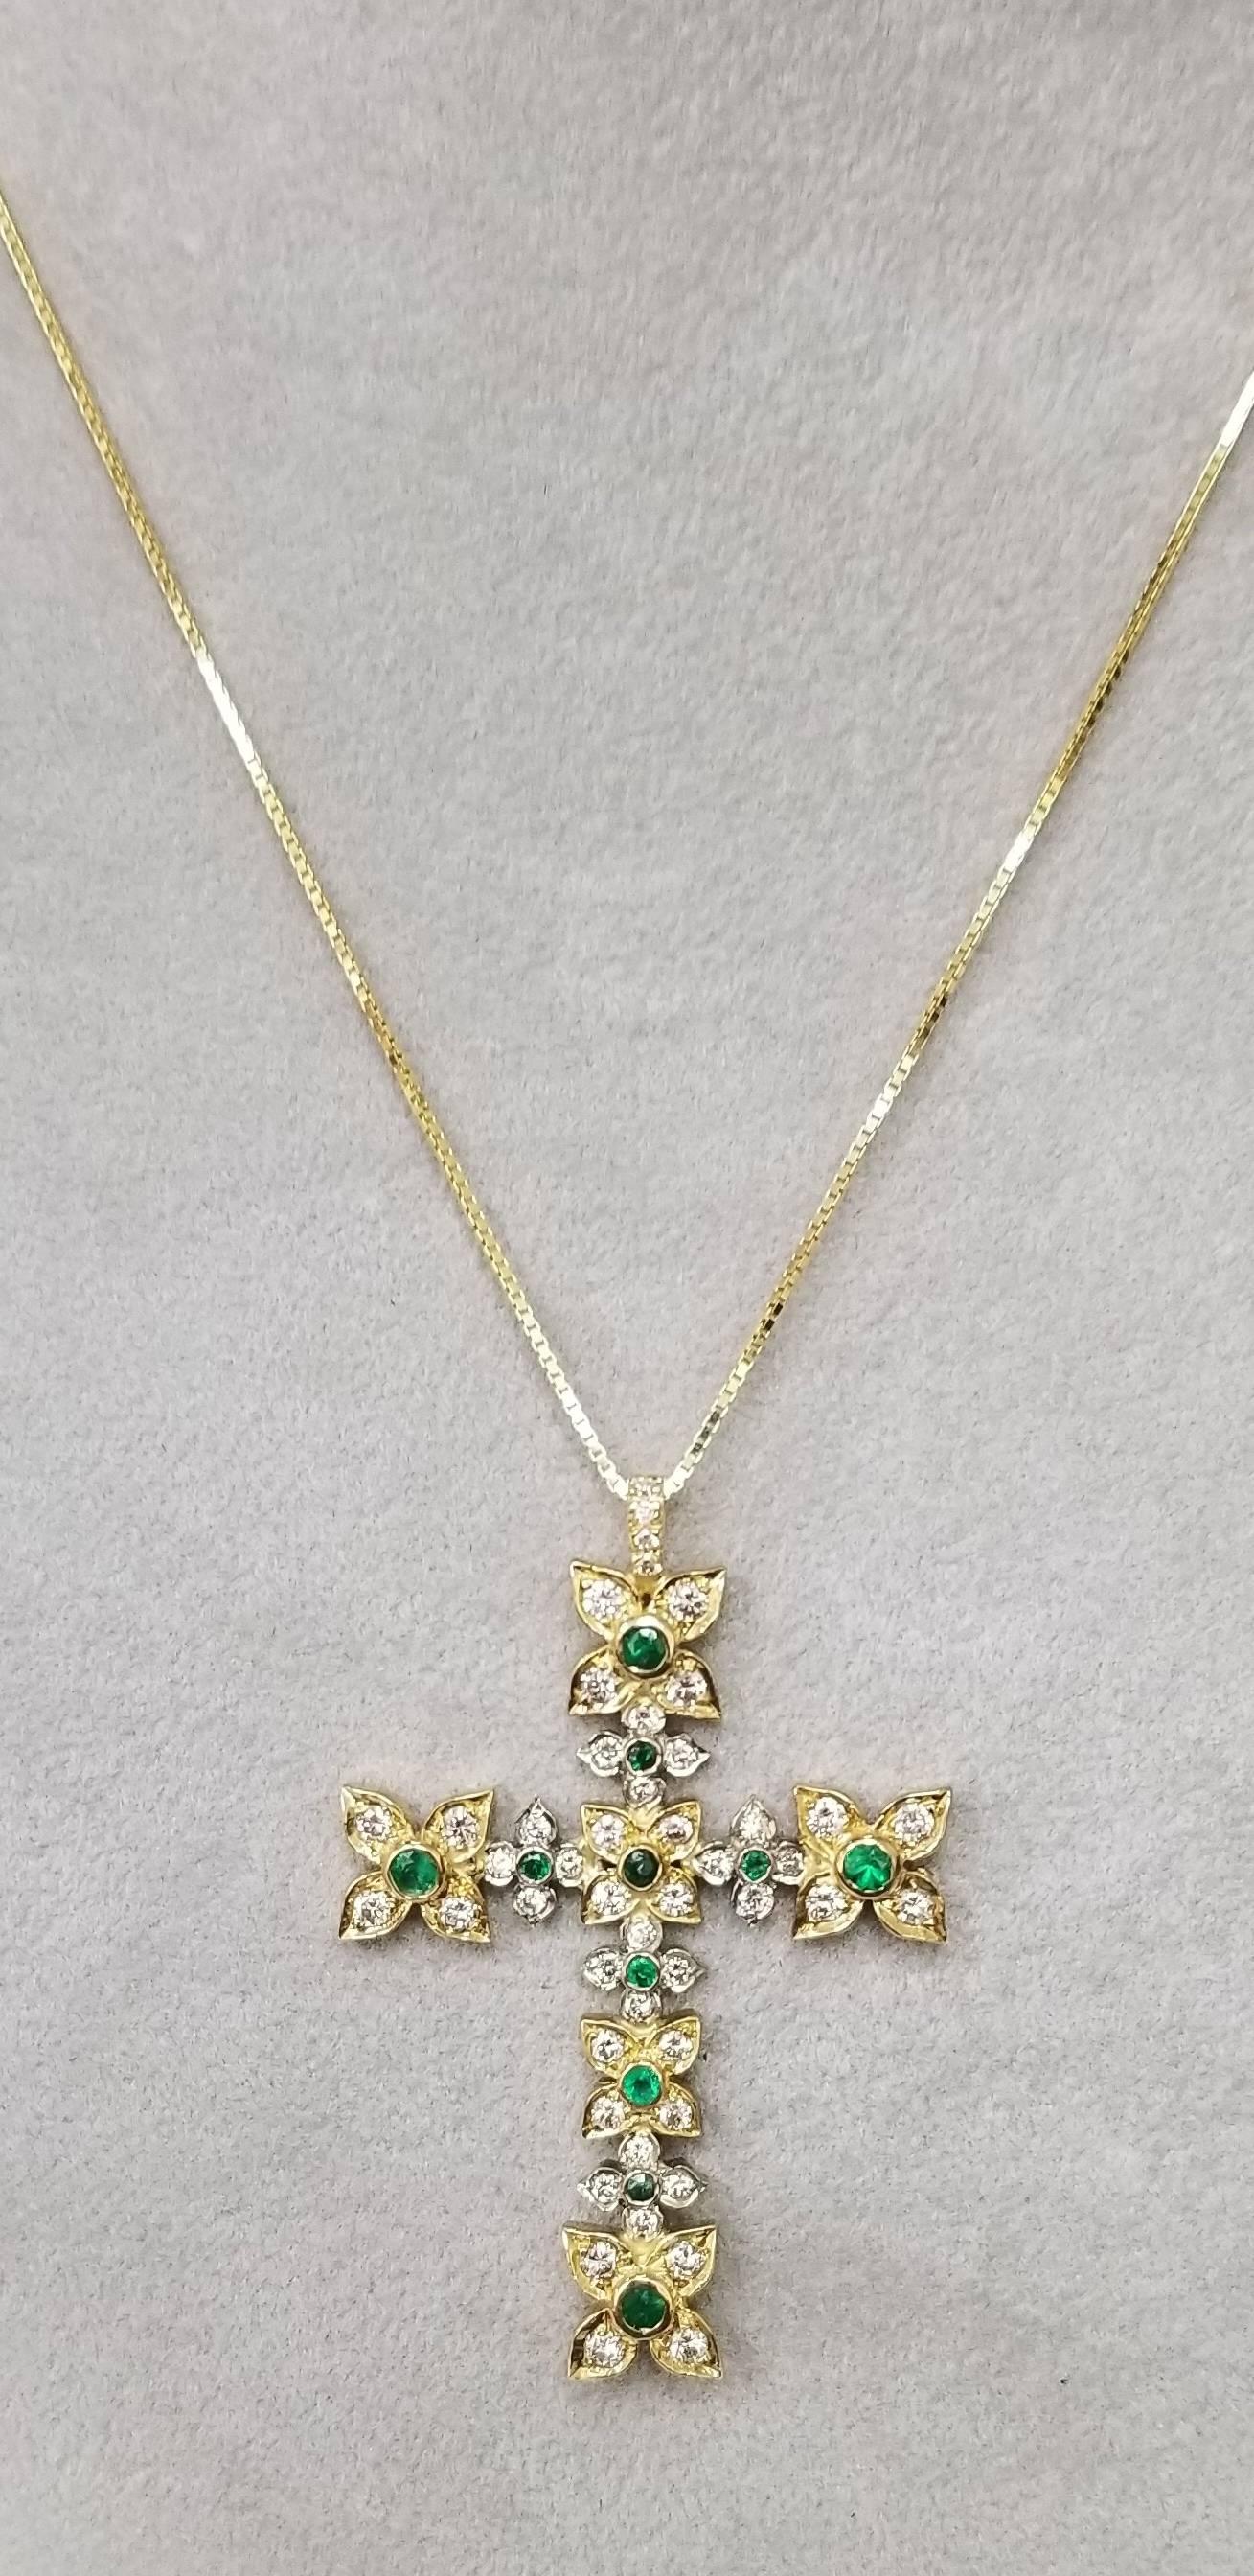 14k yellow gold emerald and diamond cross, containing 11 emerald weighing .50pts. and 44 round full cut diamonds weighing 1.50cts.  set in a flower style setting on a 16 inch box chain.